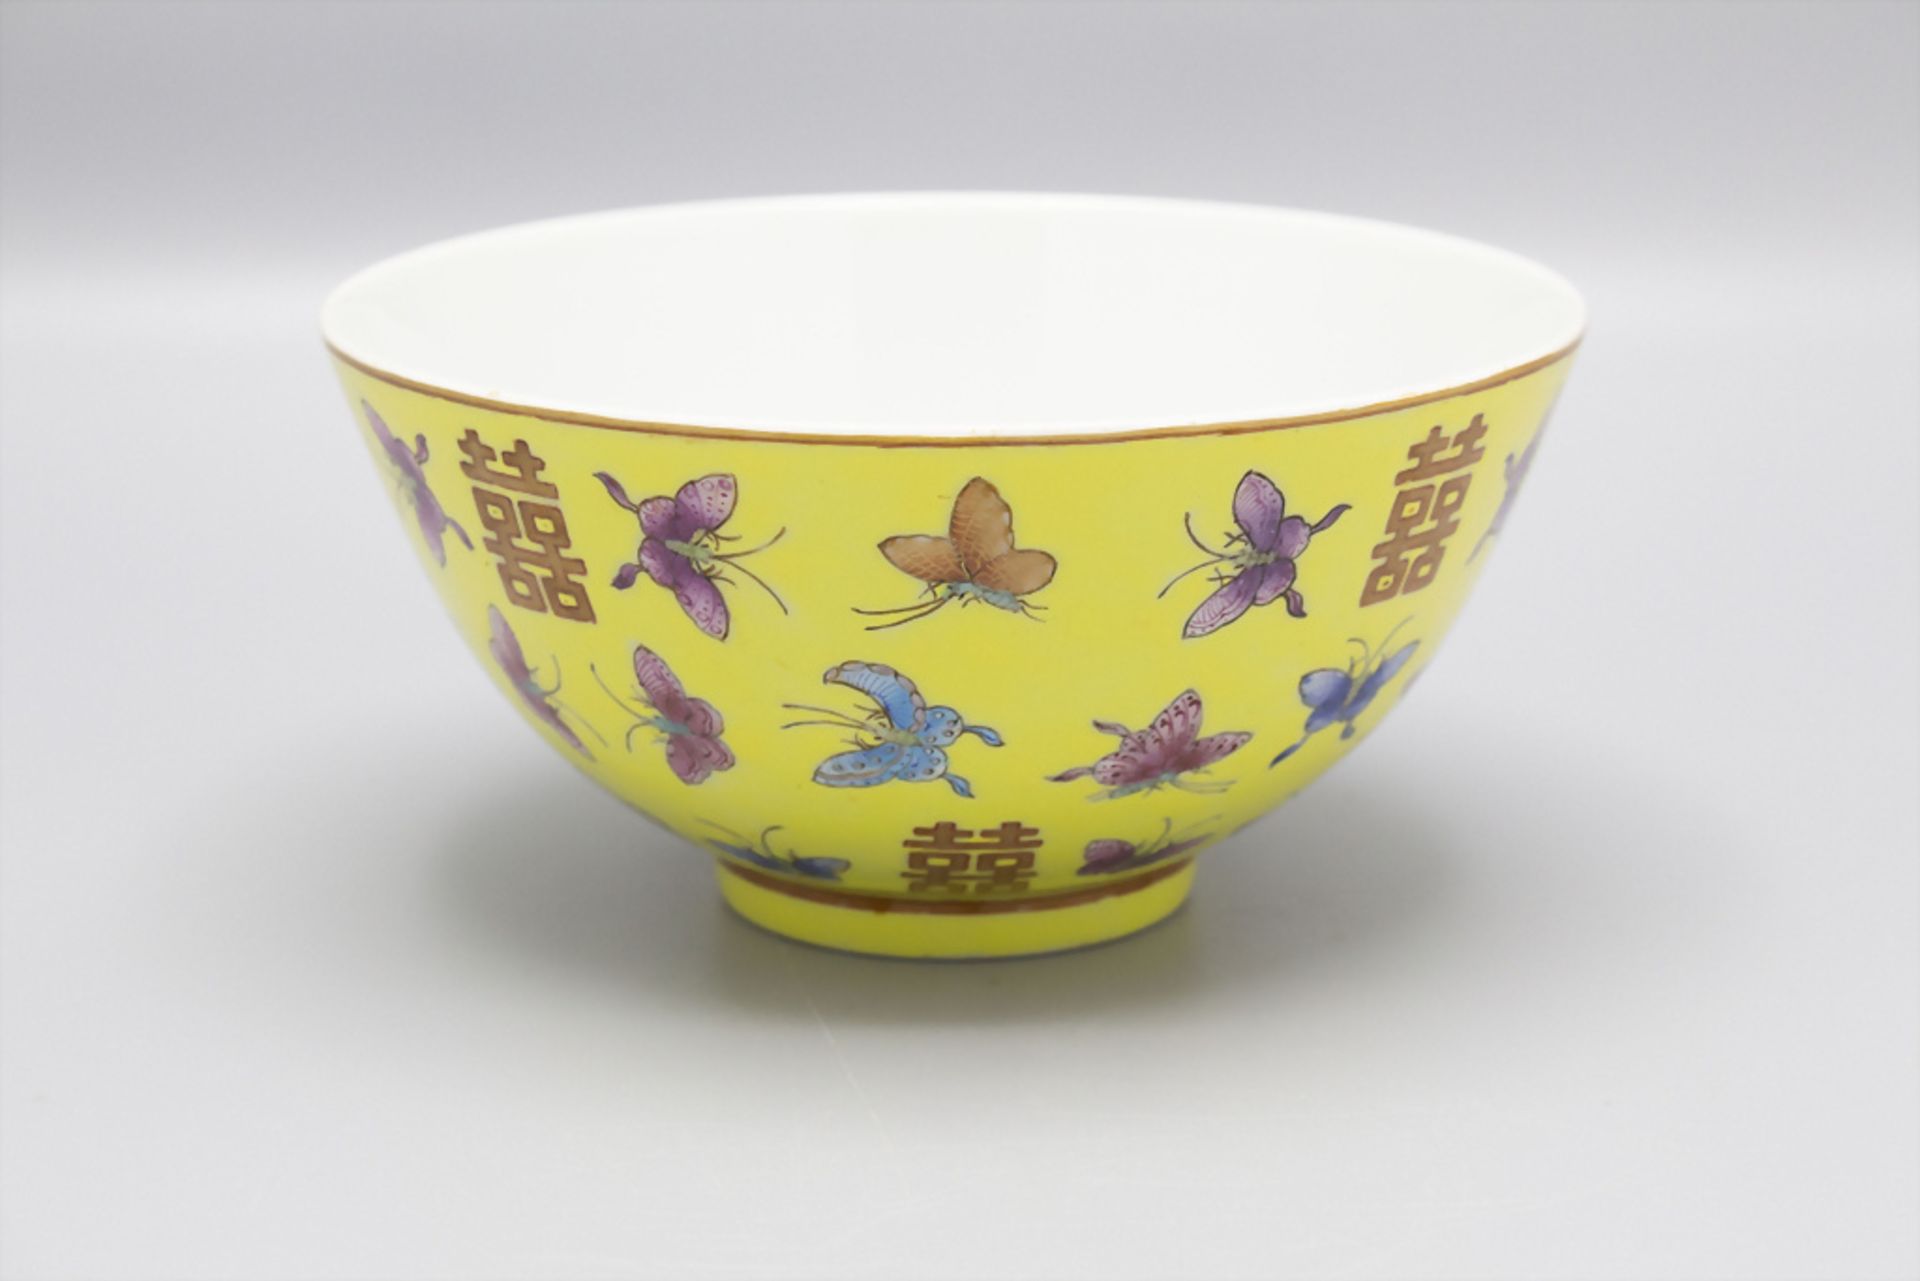 Gelbe Schale mit Schmetterlingsdekor / A yellow bowl with butterfly decor, China, Qing-Zeit, ... - Image 2 of 3